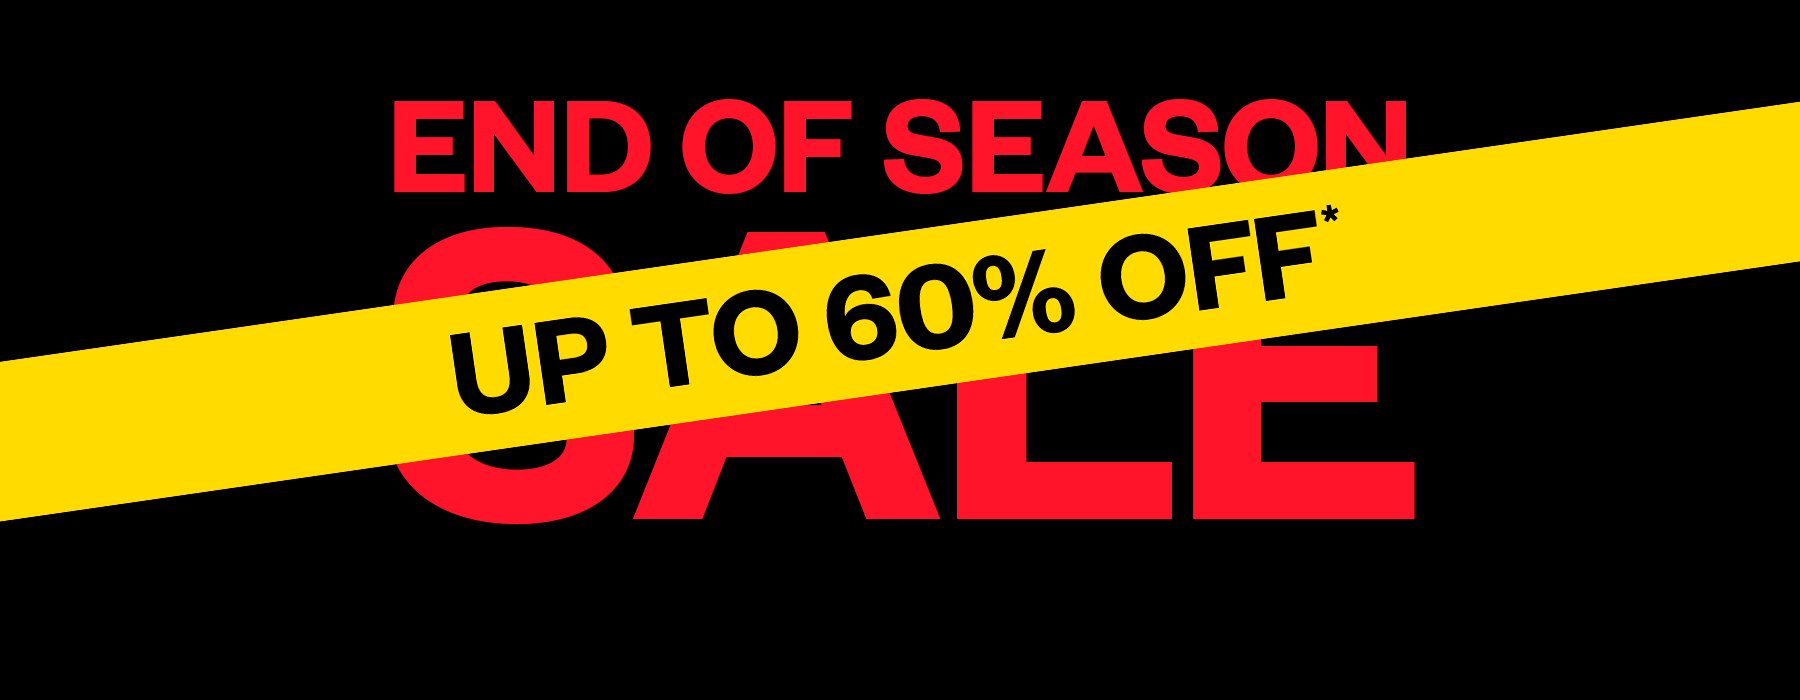 Save up to 60% OFF on End of season sale plus further 25% OFF